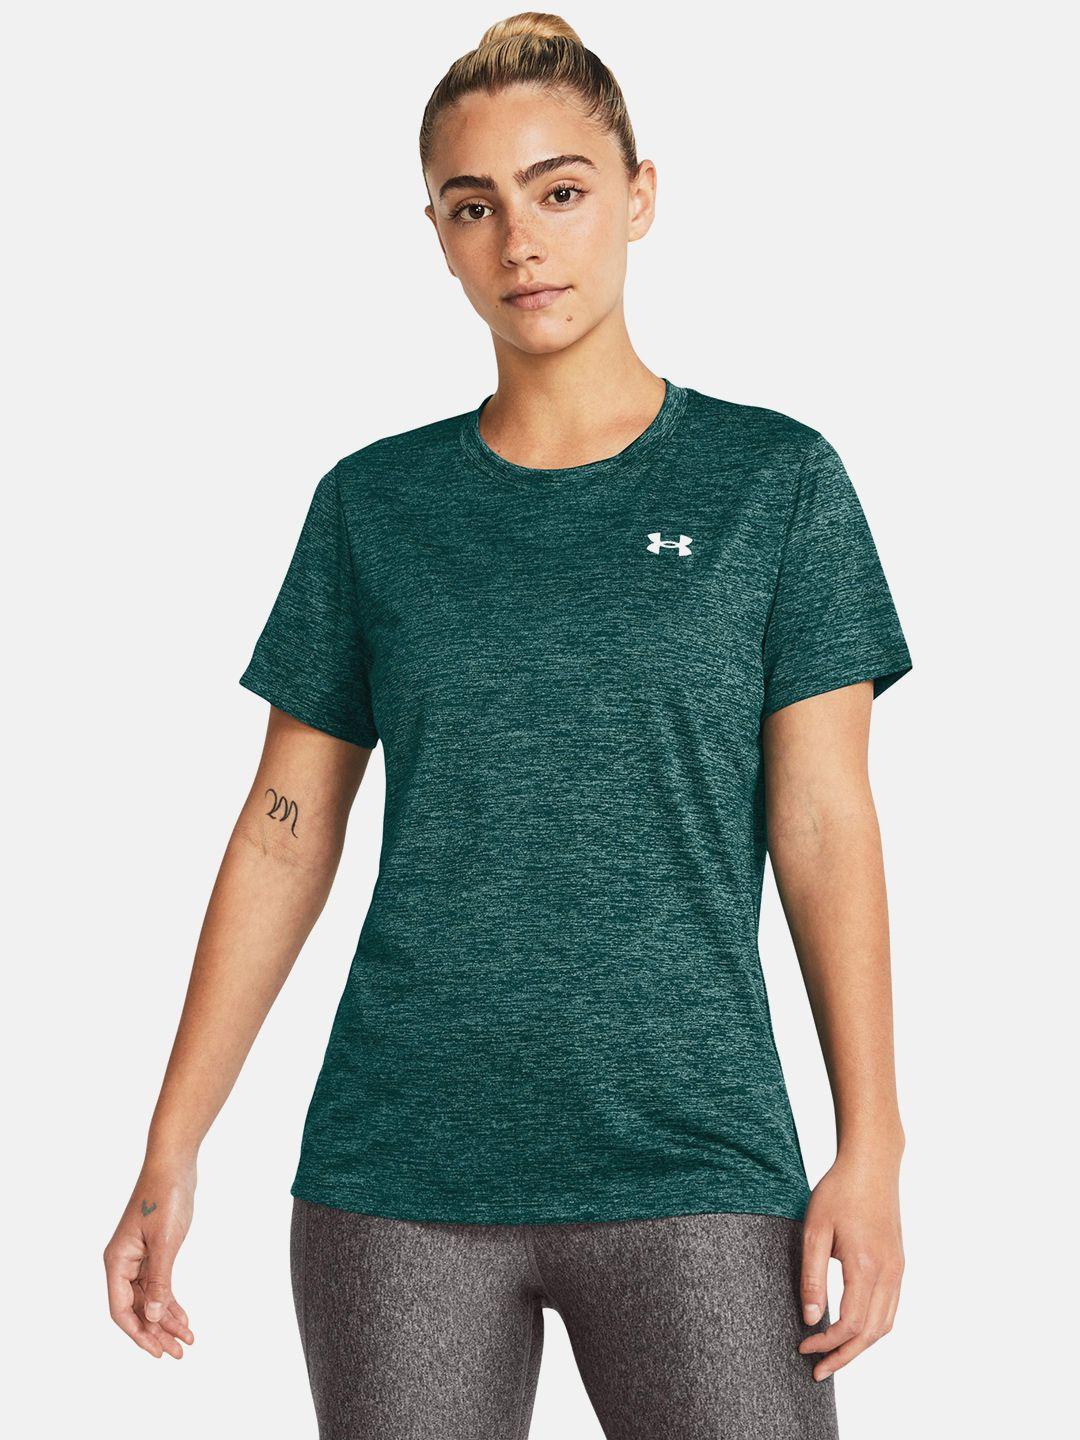 under armour brand logo printed detail fast-drying loose fit tech t-shirt